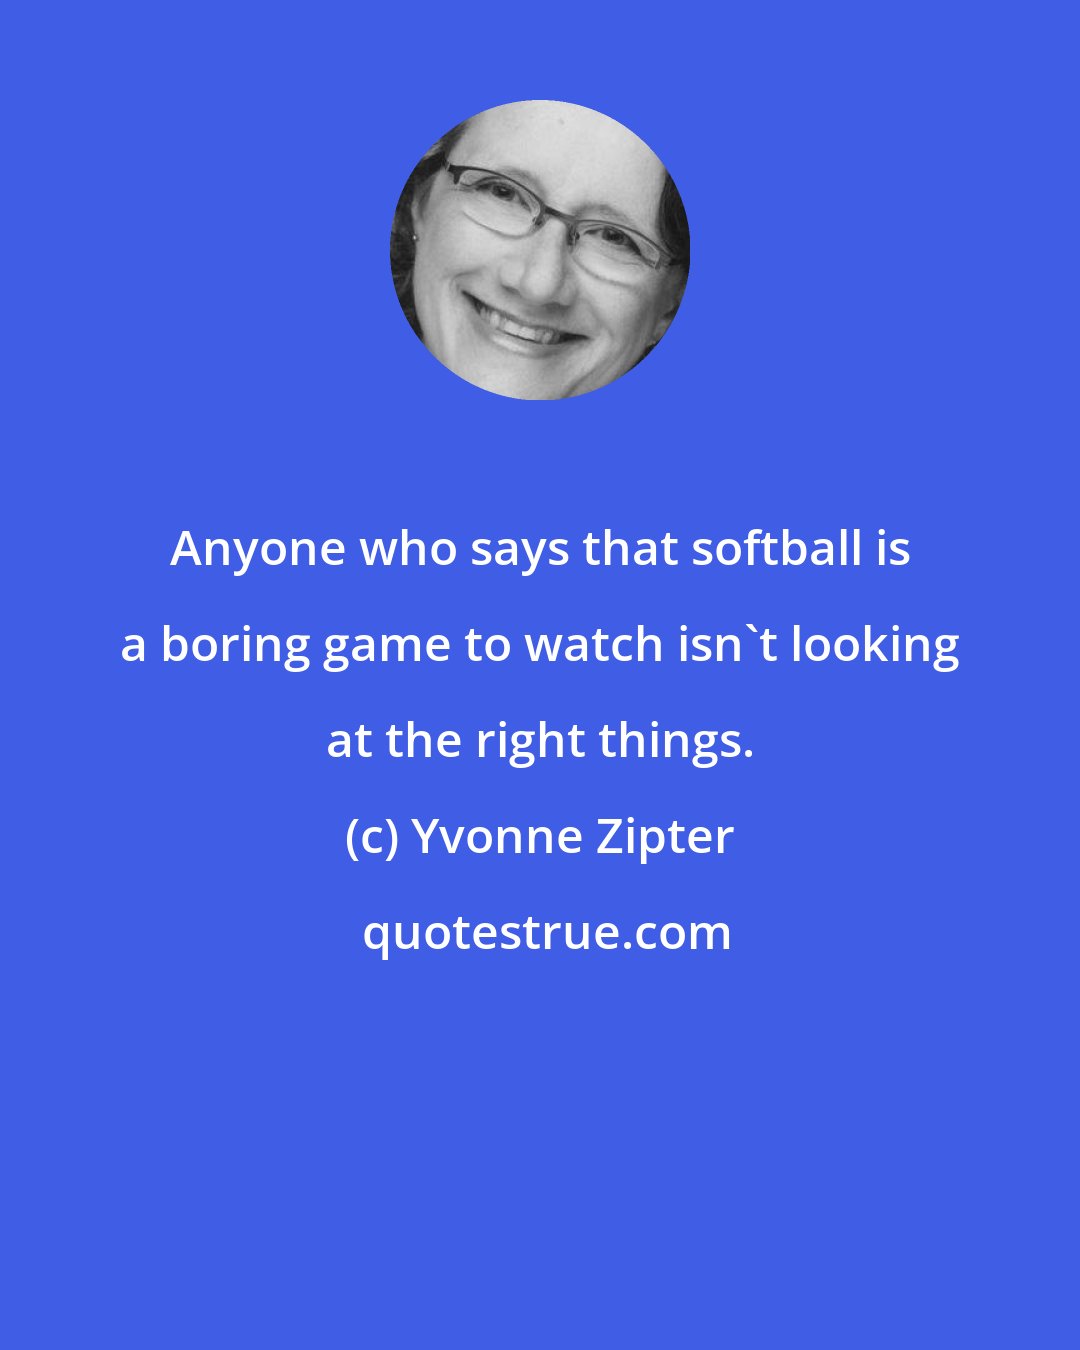 Yvonne Zipter: Anyone who says that softball is a boring game to watch isn't looking at the right things.